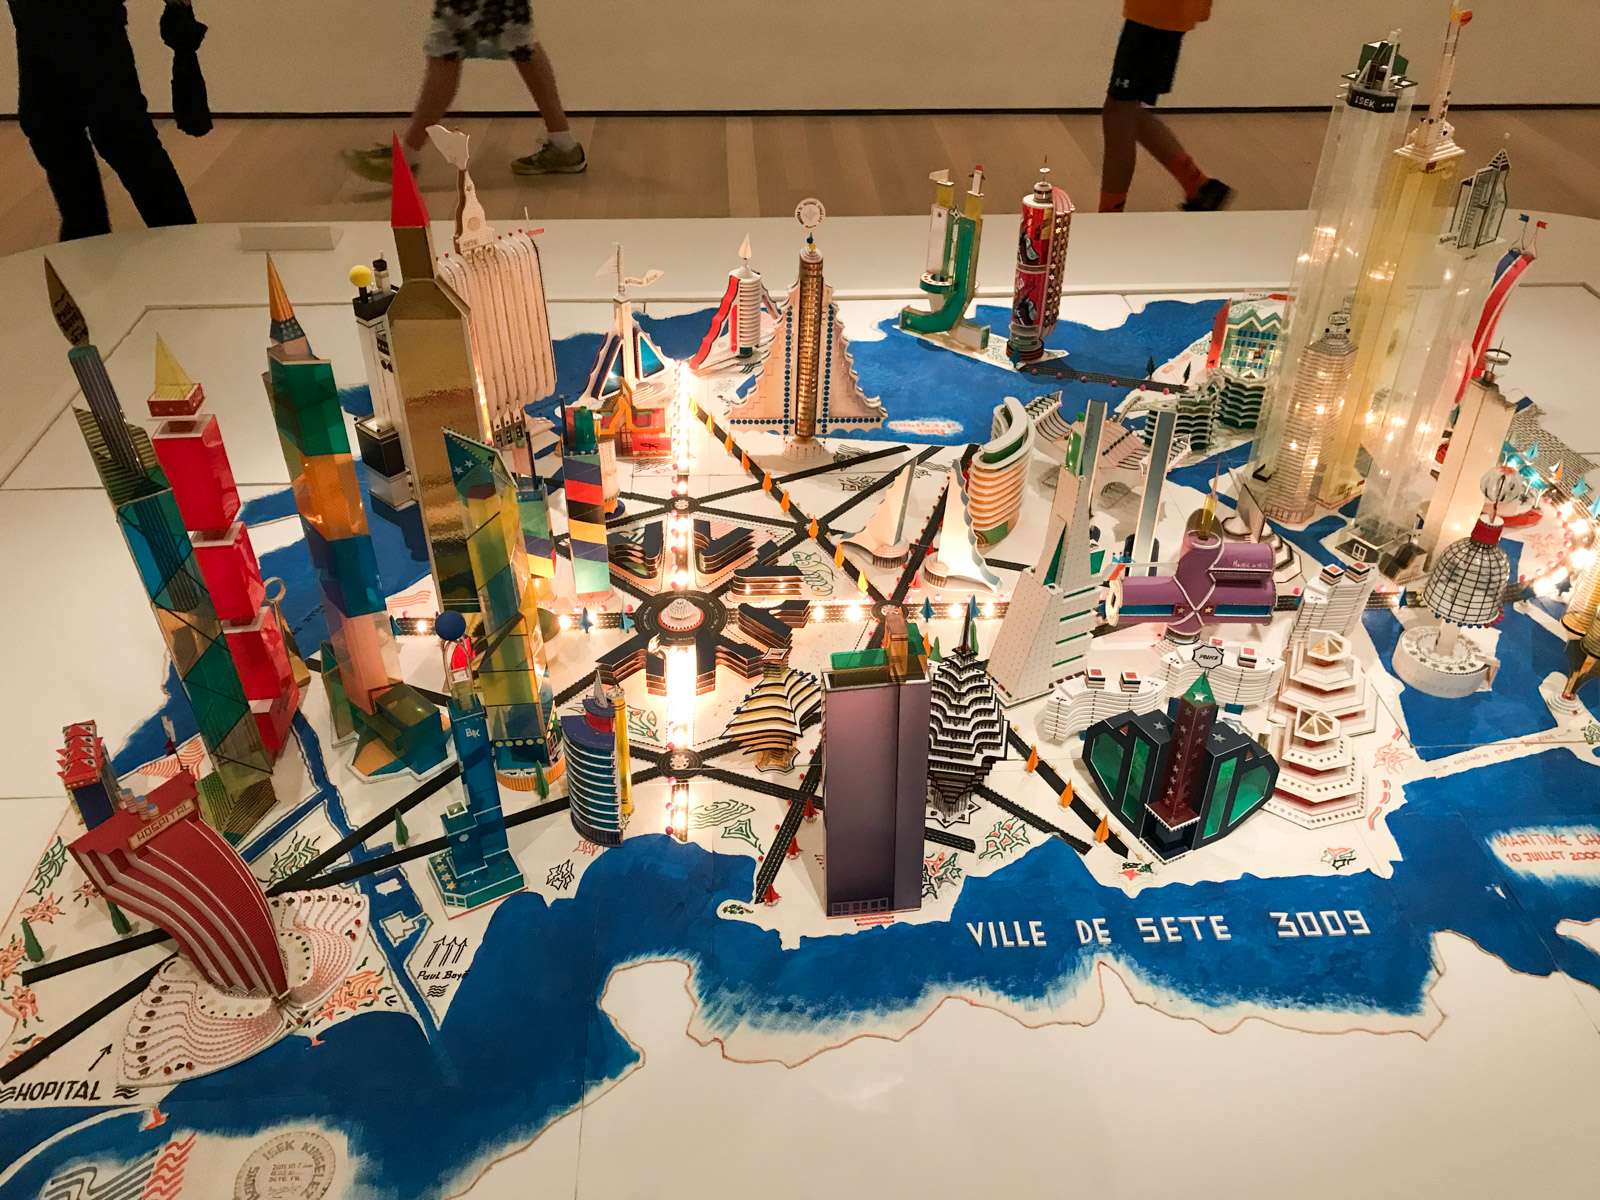 A high angle view of a sculpture made out of mostly coloured cardboard, assembled together like a city on an island